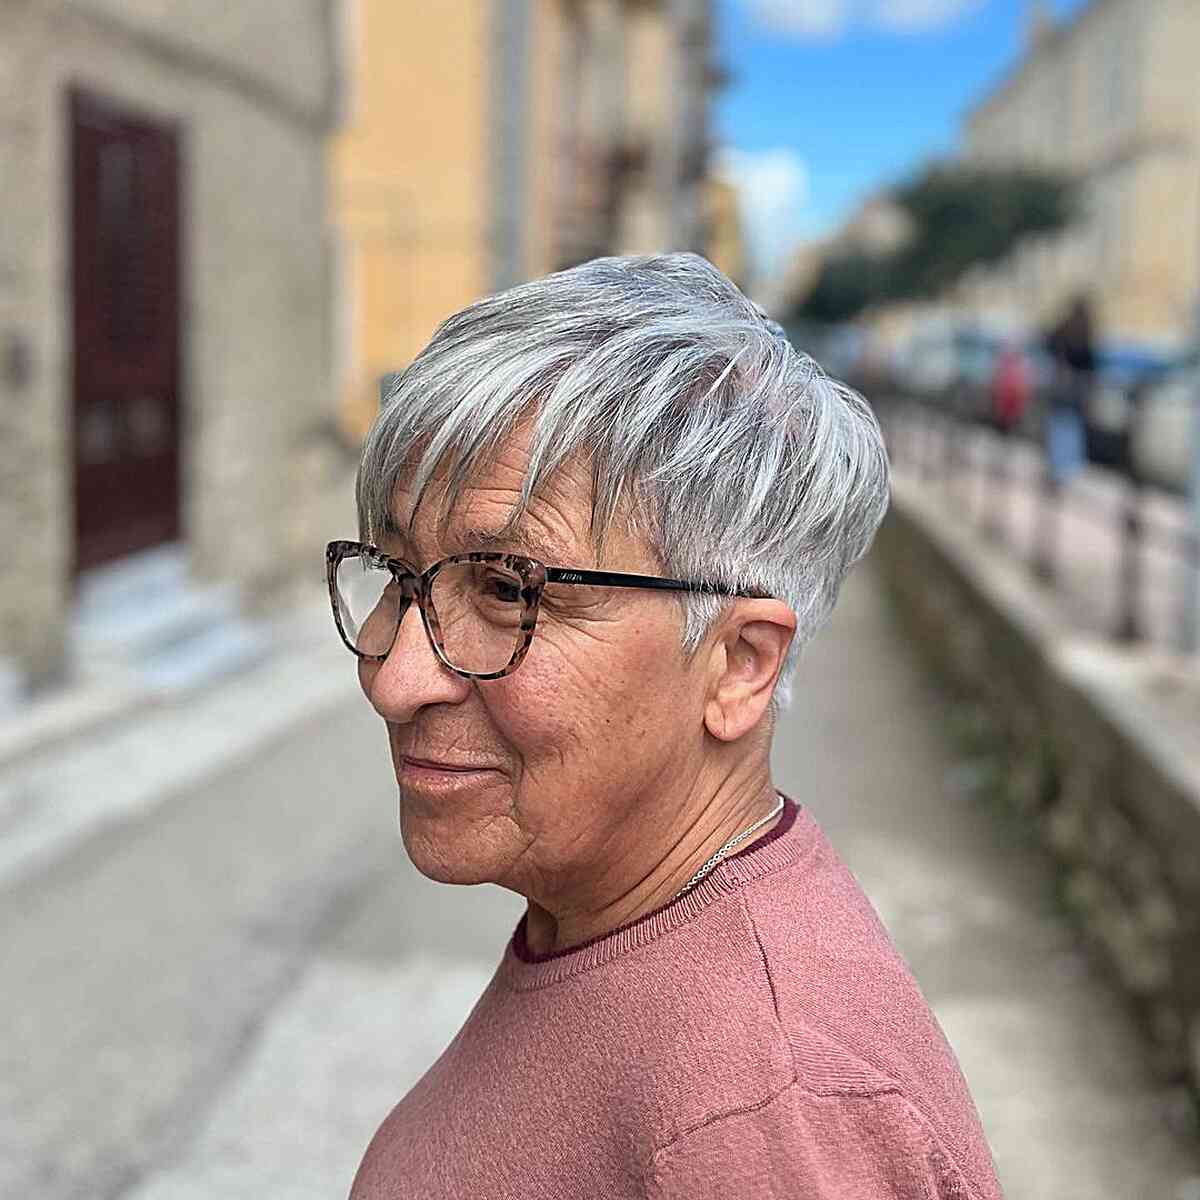 Silver Choppy Pixie with Fringe for Senior Ladies Over 60 with Eyeglasses and Thin Hair